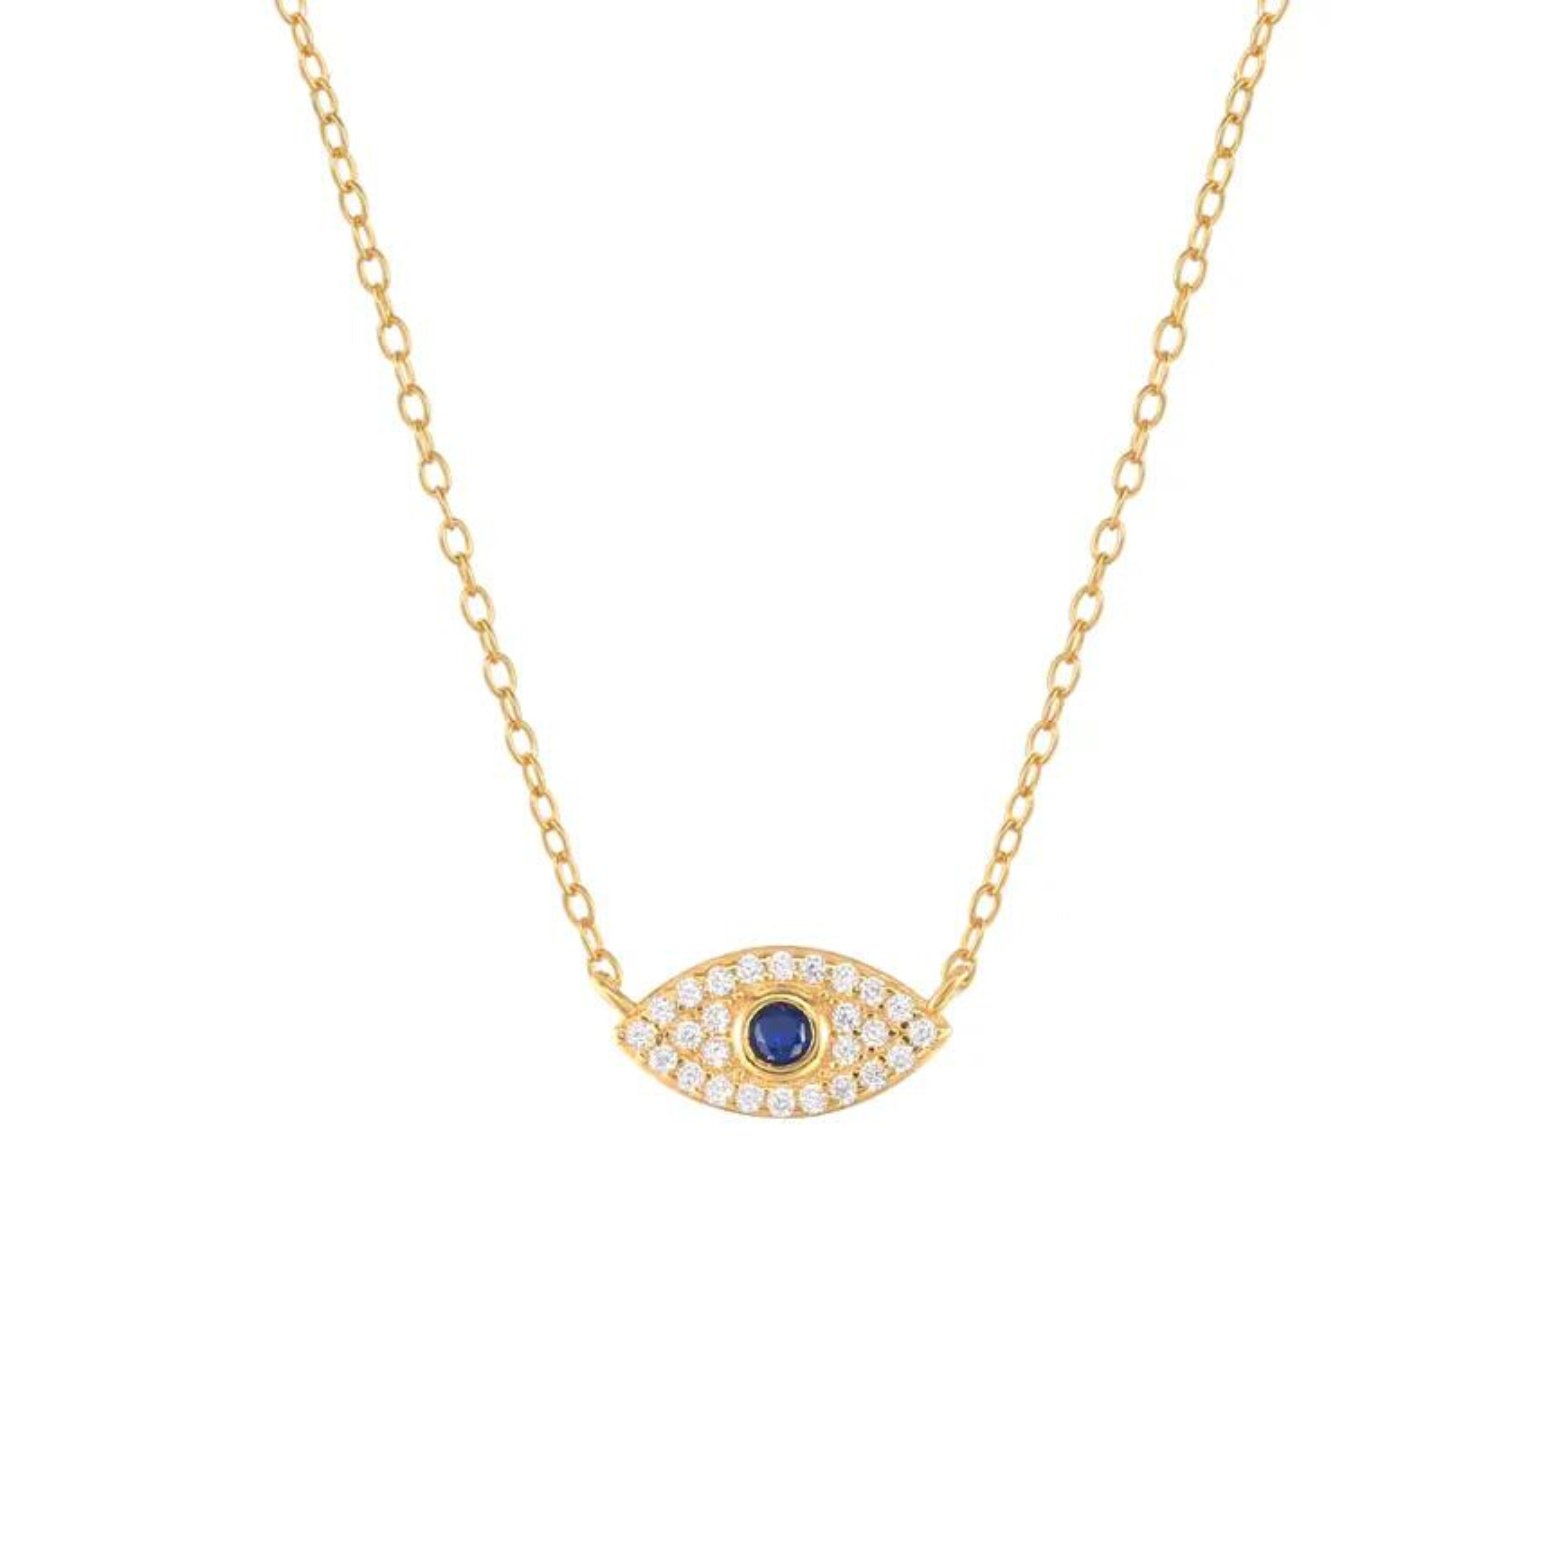 14K gold-plated Iris necklace featuring an evil eye pendant with sapphire accents